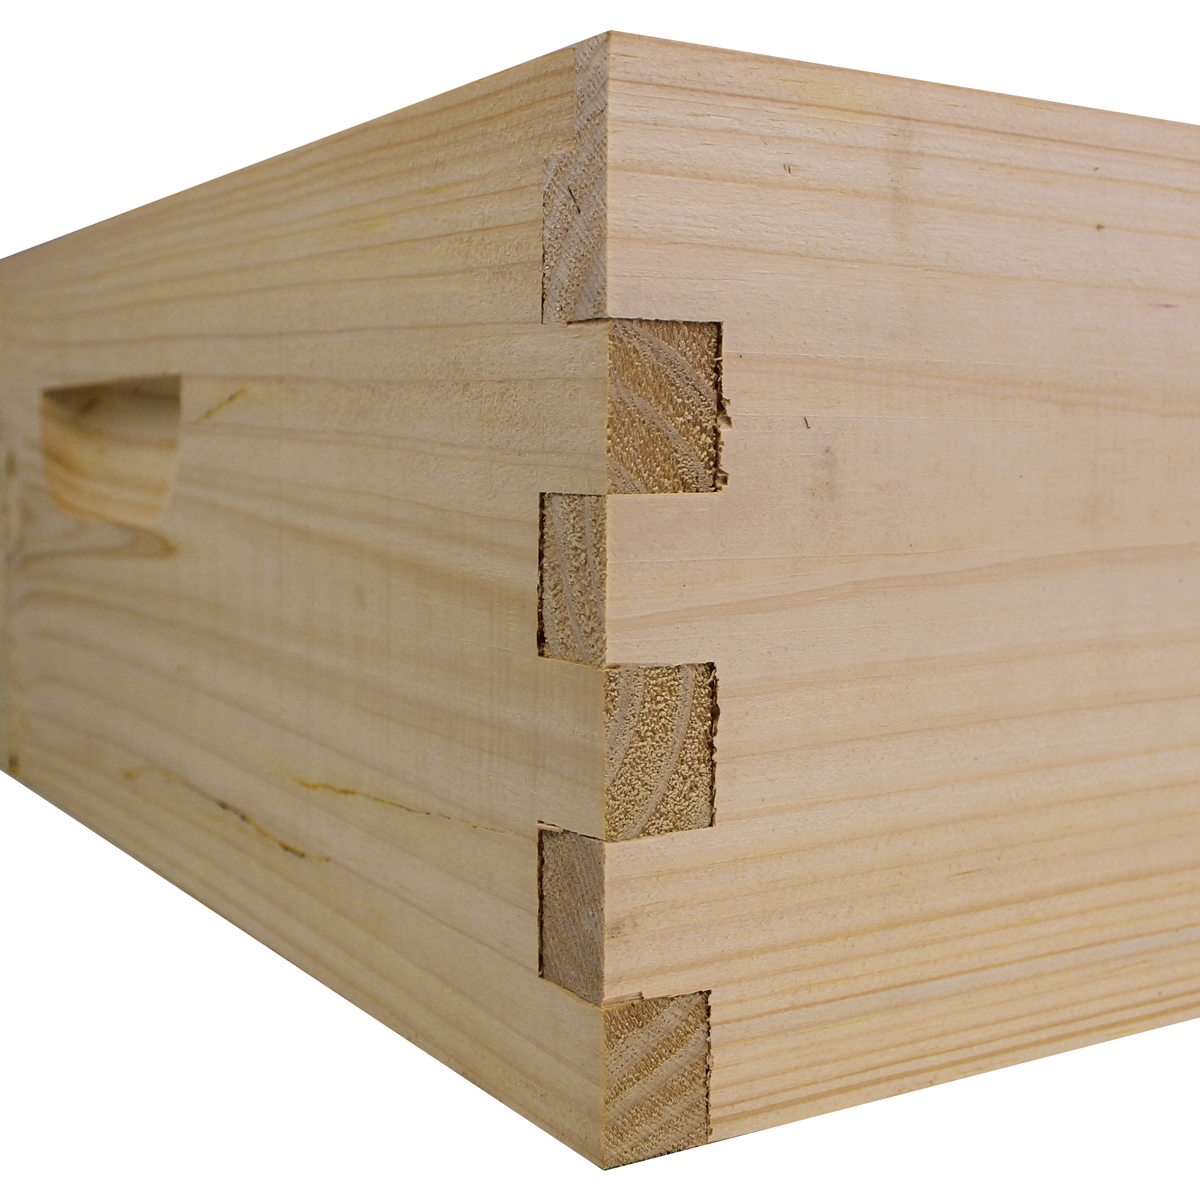 Busy Bees 'N' More Amish Made Hives 10 Frame Medium Bee Box Uses Finger Joints